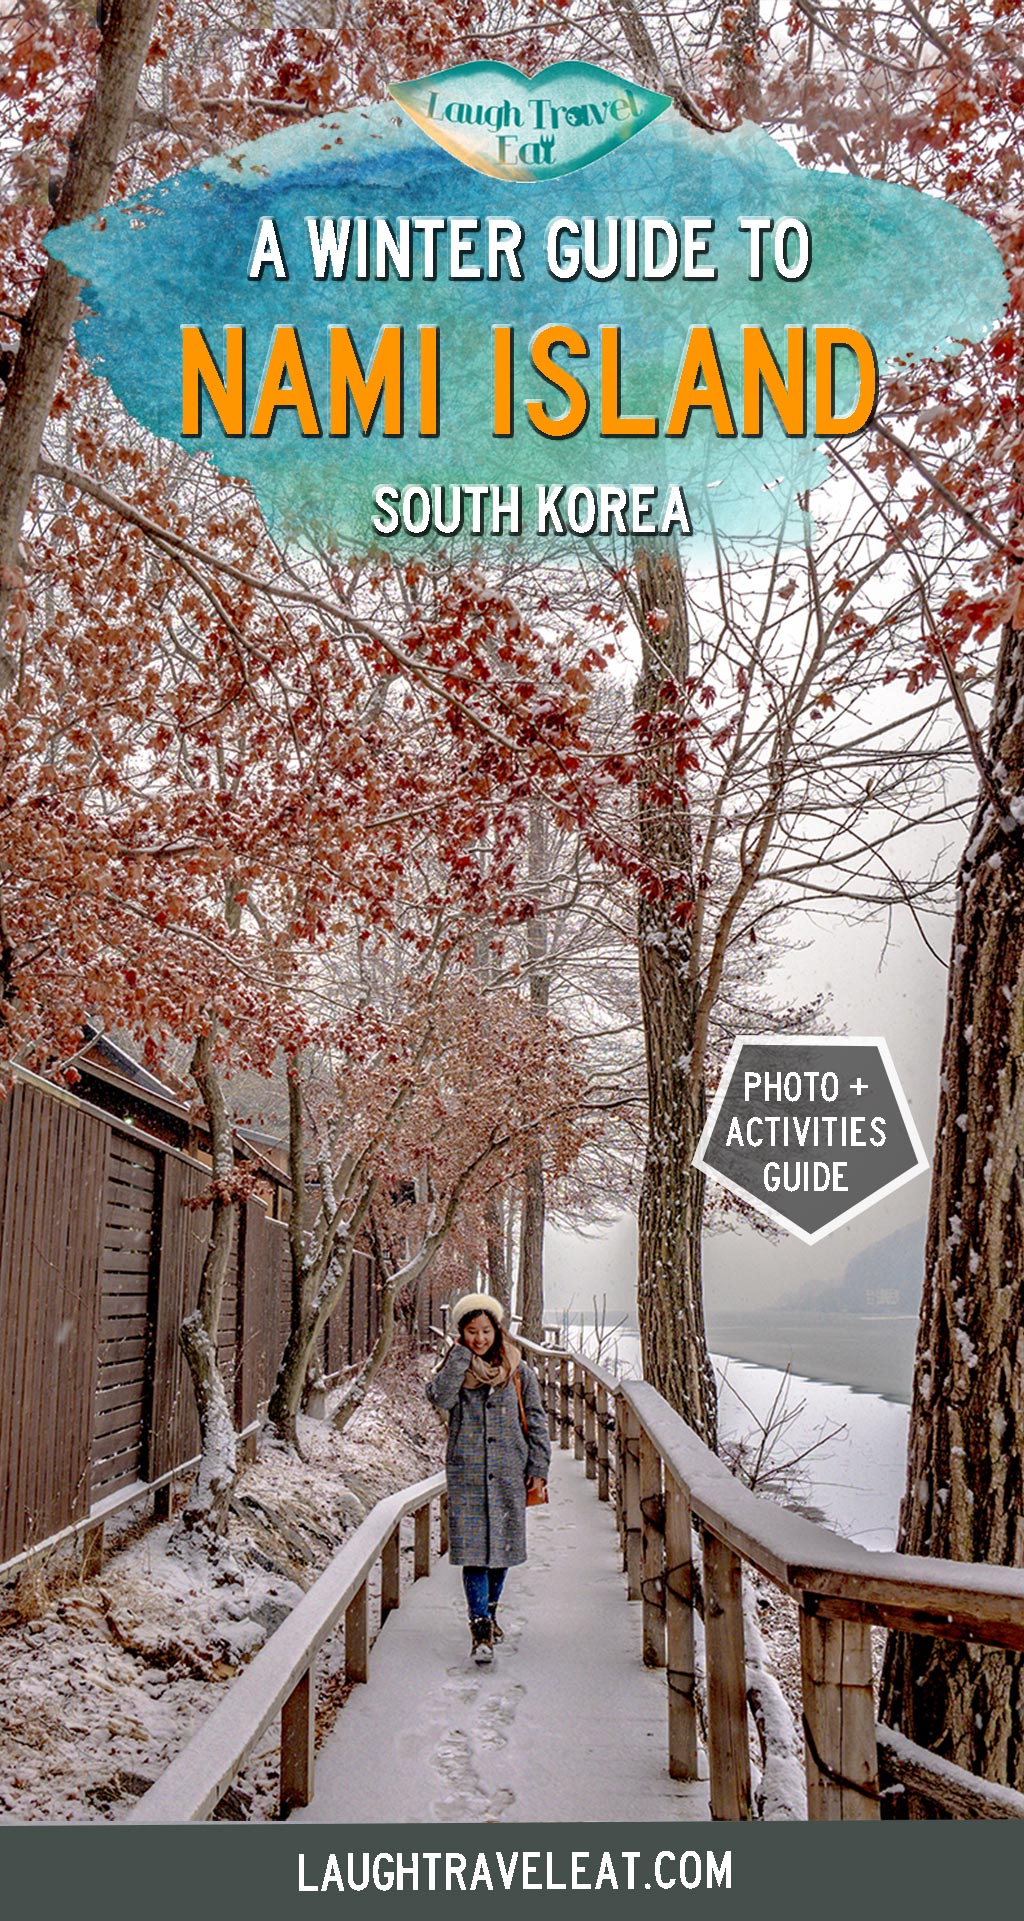 Nami Island is a popular destination from Seoul that deserves more than just a day. It is just over an hour from Seoul and a complete winter wonderland. Here are the best photo spots and activities to do on the island for a day or three #Seoul #SouthKorea #NamiIsland #Gangwon